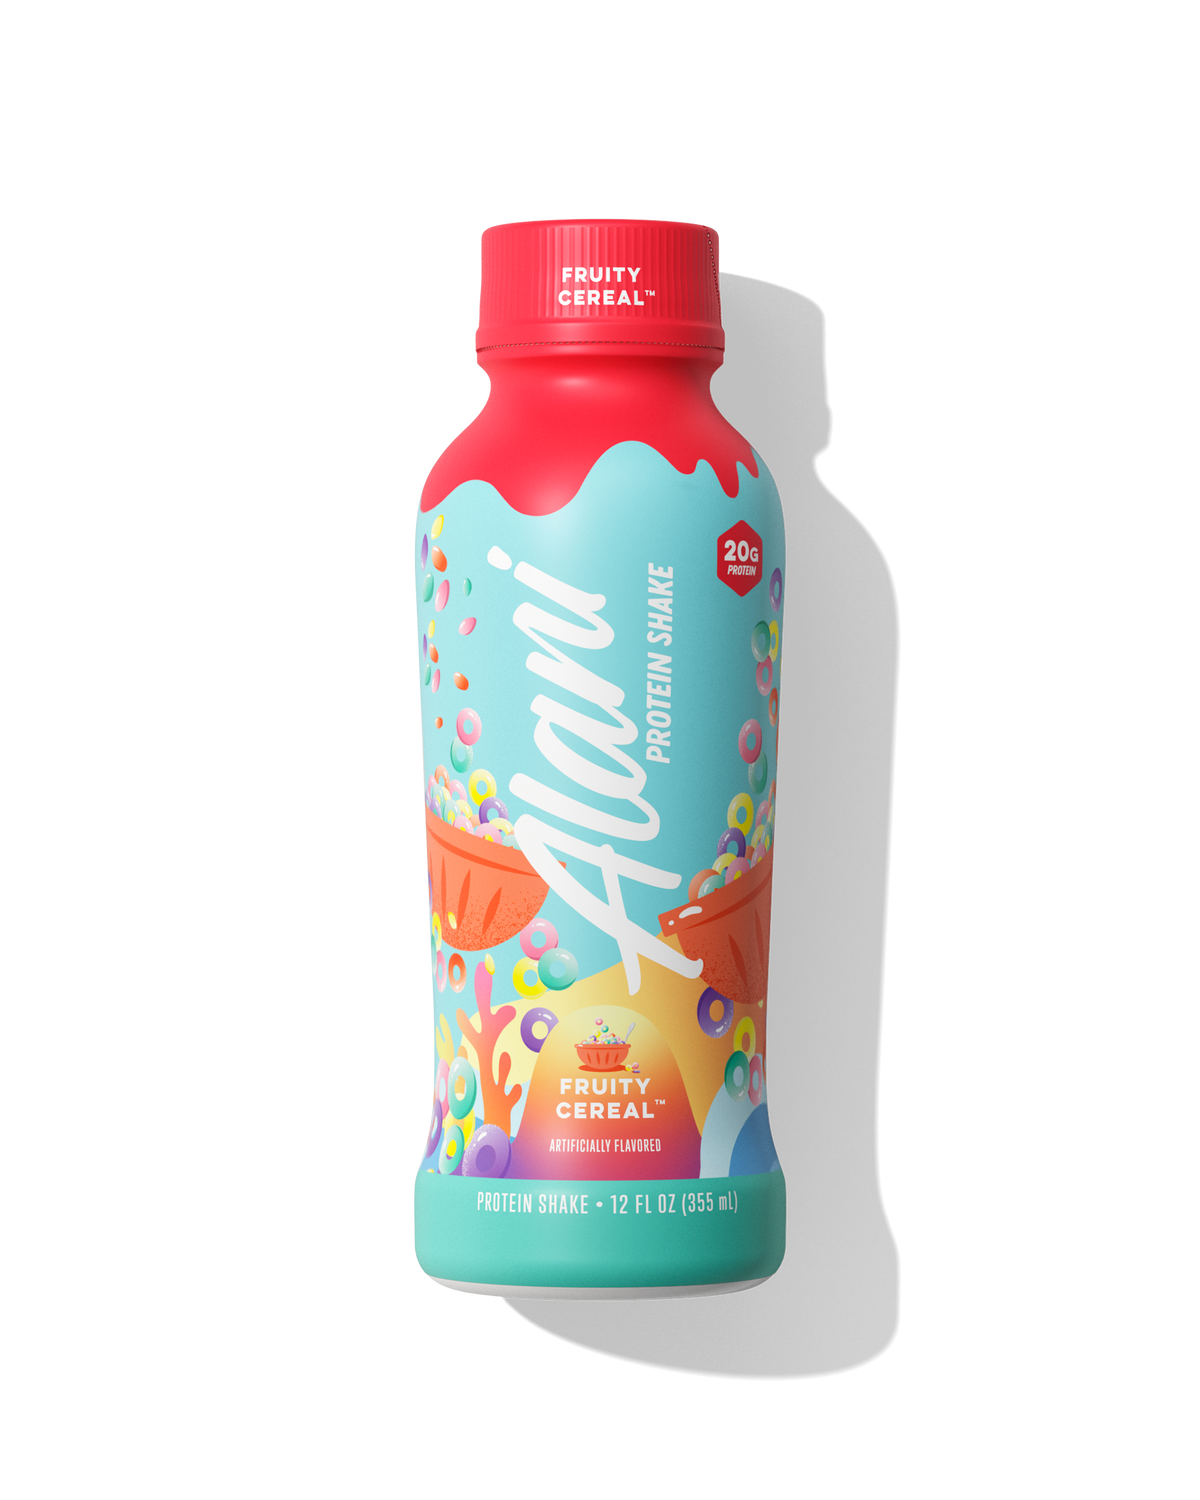 A 12 fl oz bottle of protein shake in Fruity Cereal flavor.